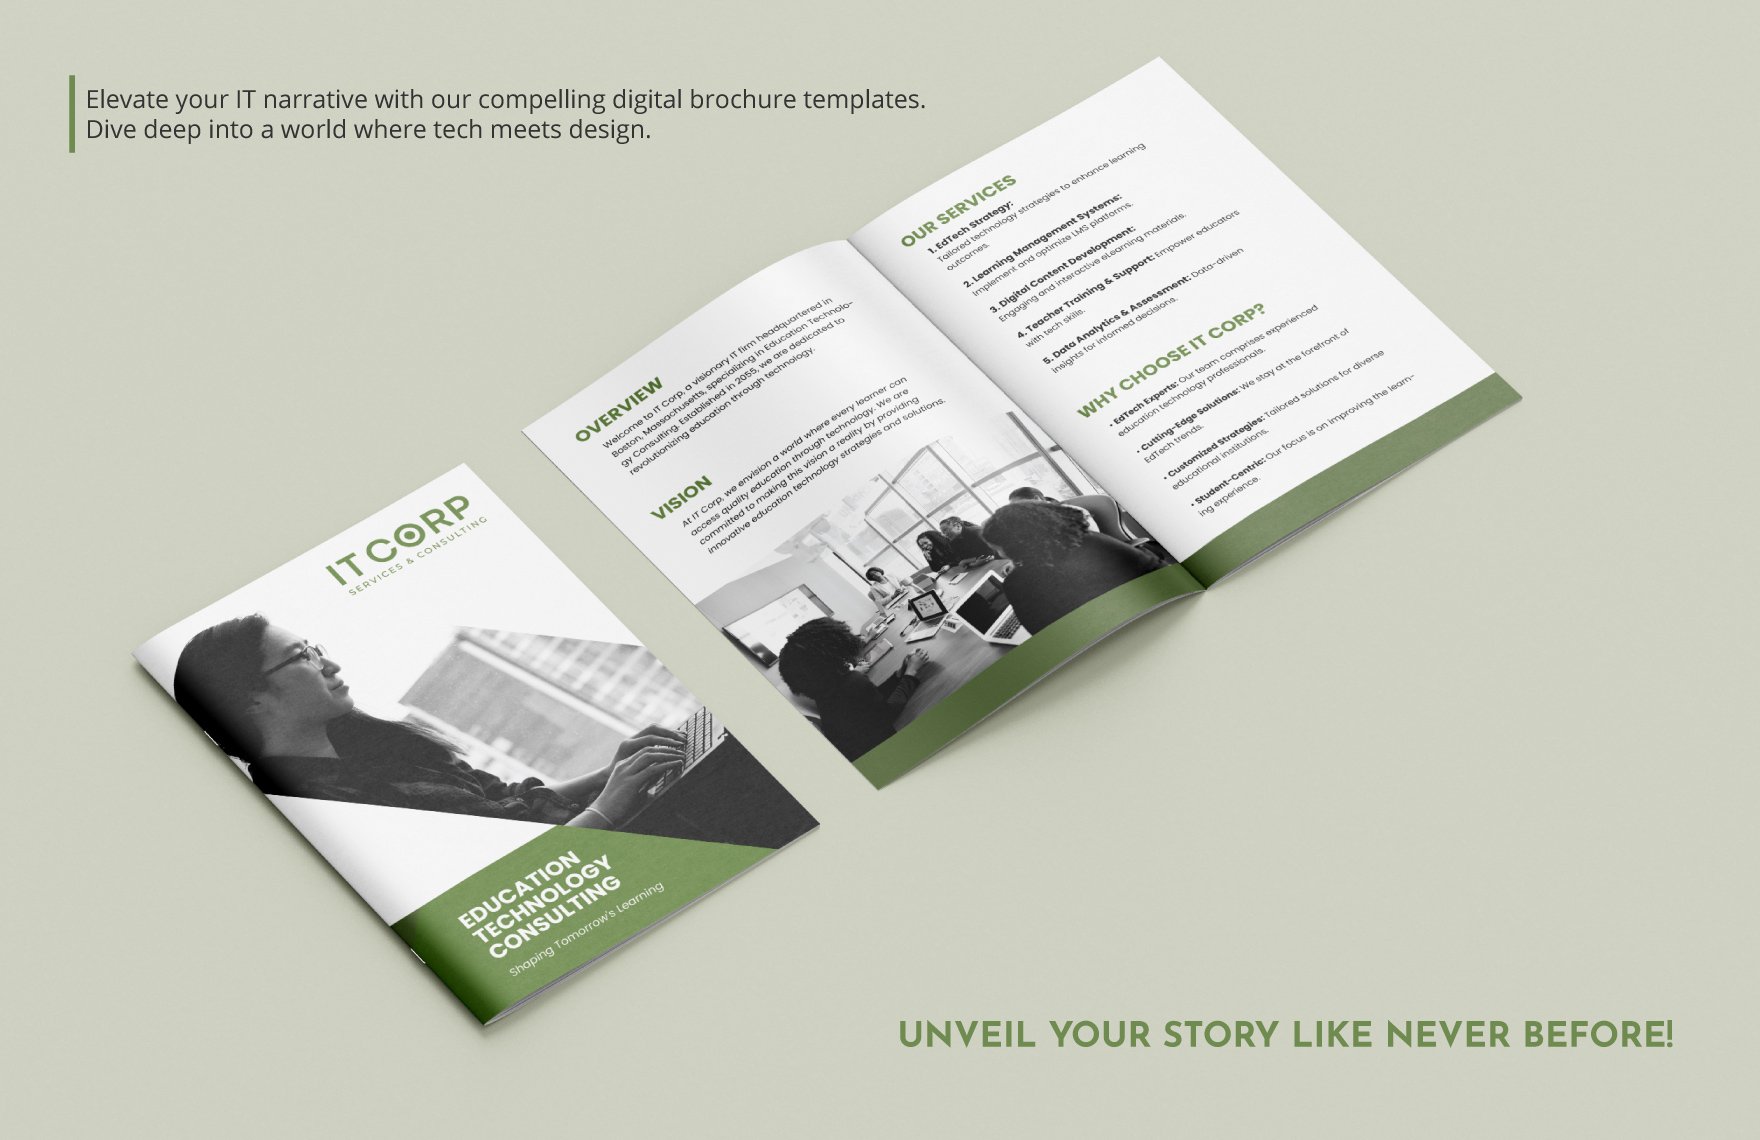 IT Education Technology Consulting Company Profile Digital Brochure Template